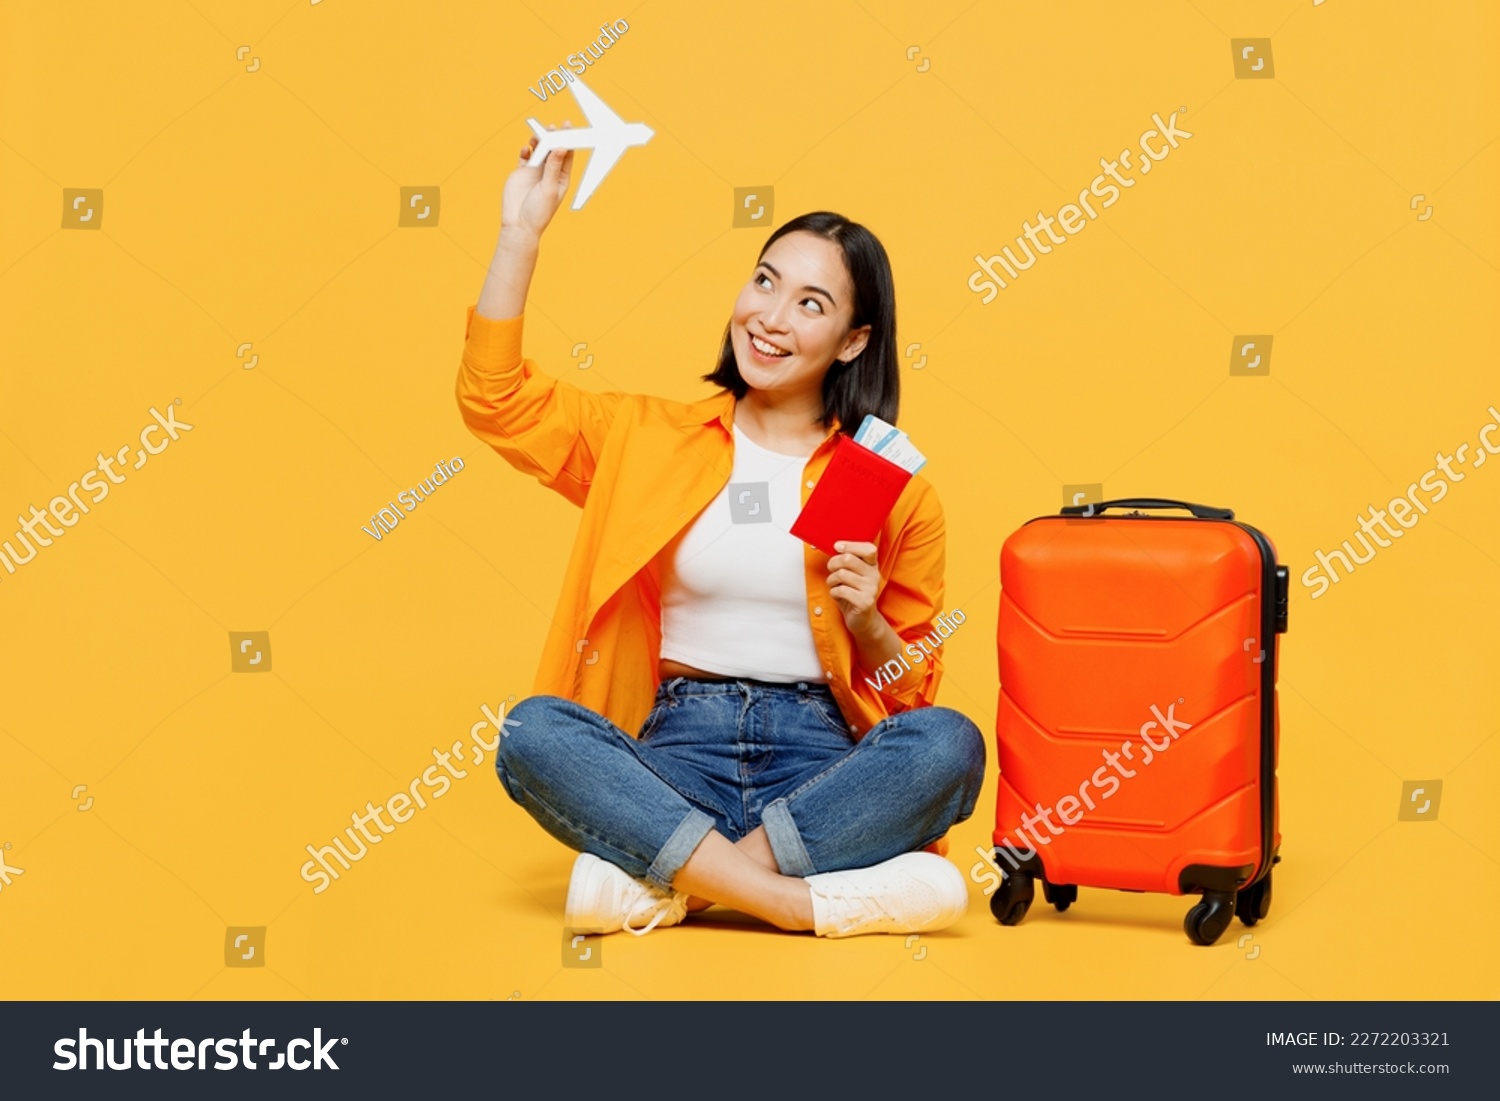 Young woman wear summer casual clothes hold passport ticket airplane mockup isolated on plain yellow background. Tourist travel abroad in free spare time rest getaway. Air flight trip journey concept #2272203321